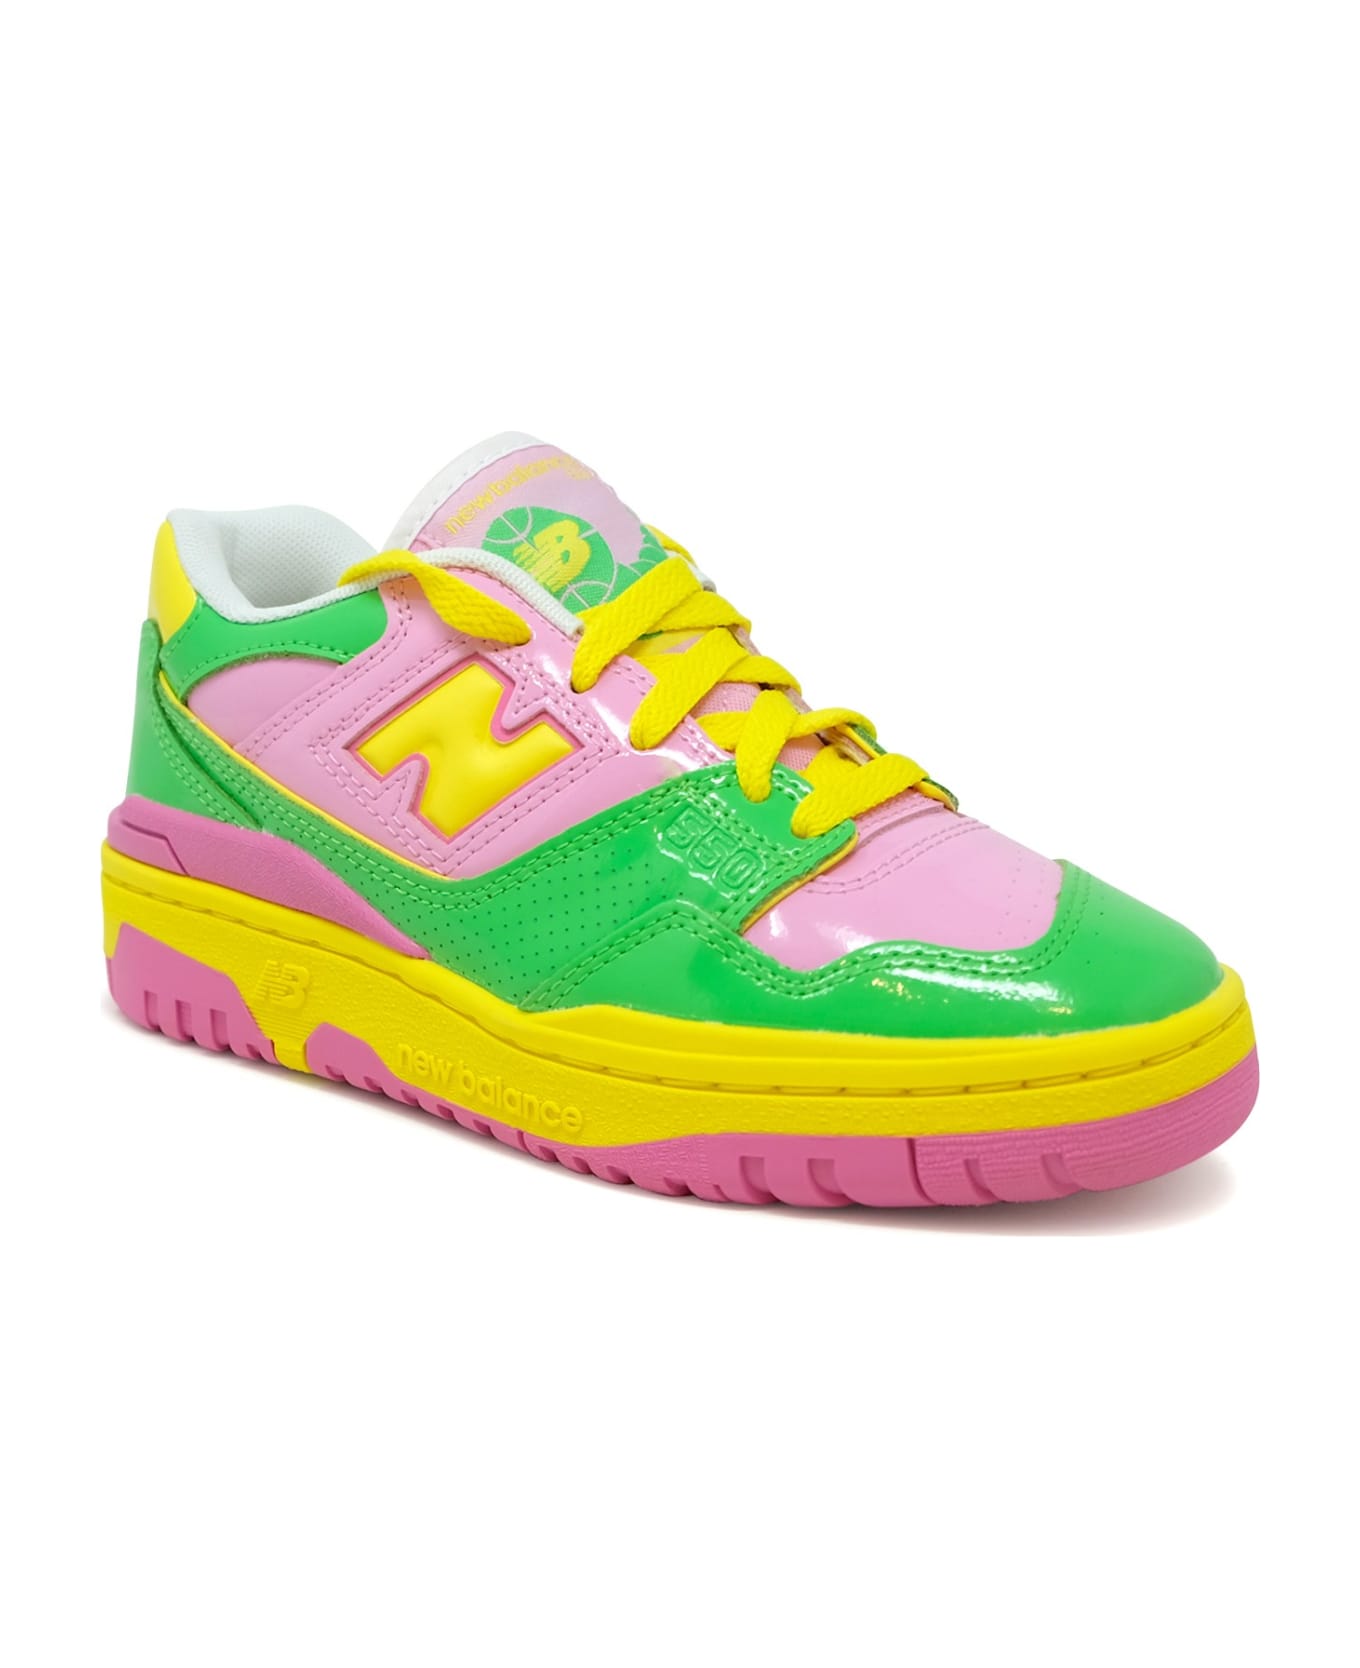 New Balance Multicolor Leather Sneaker - Pink